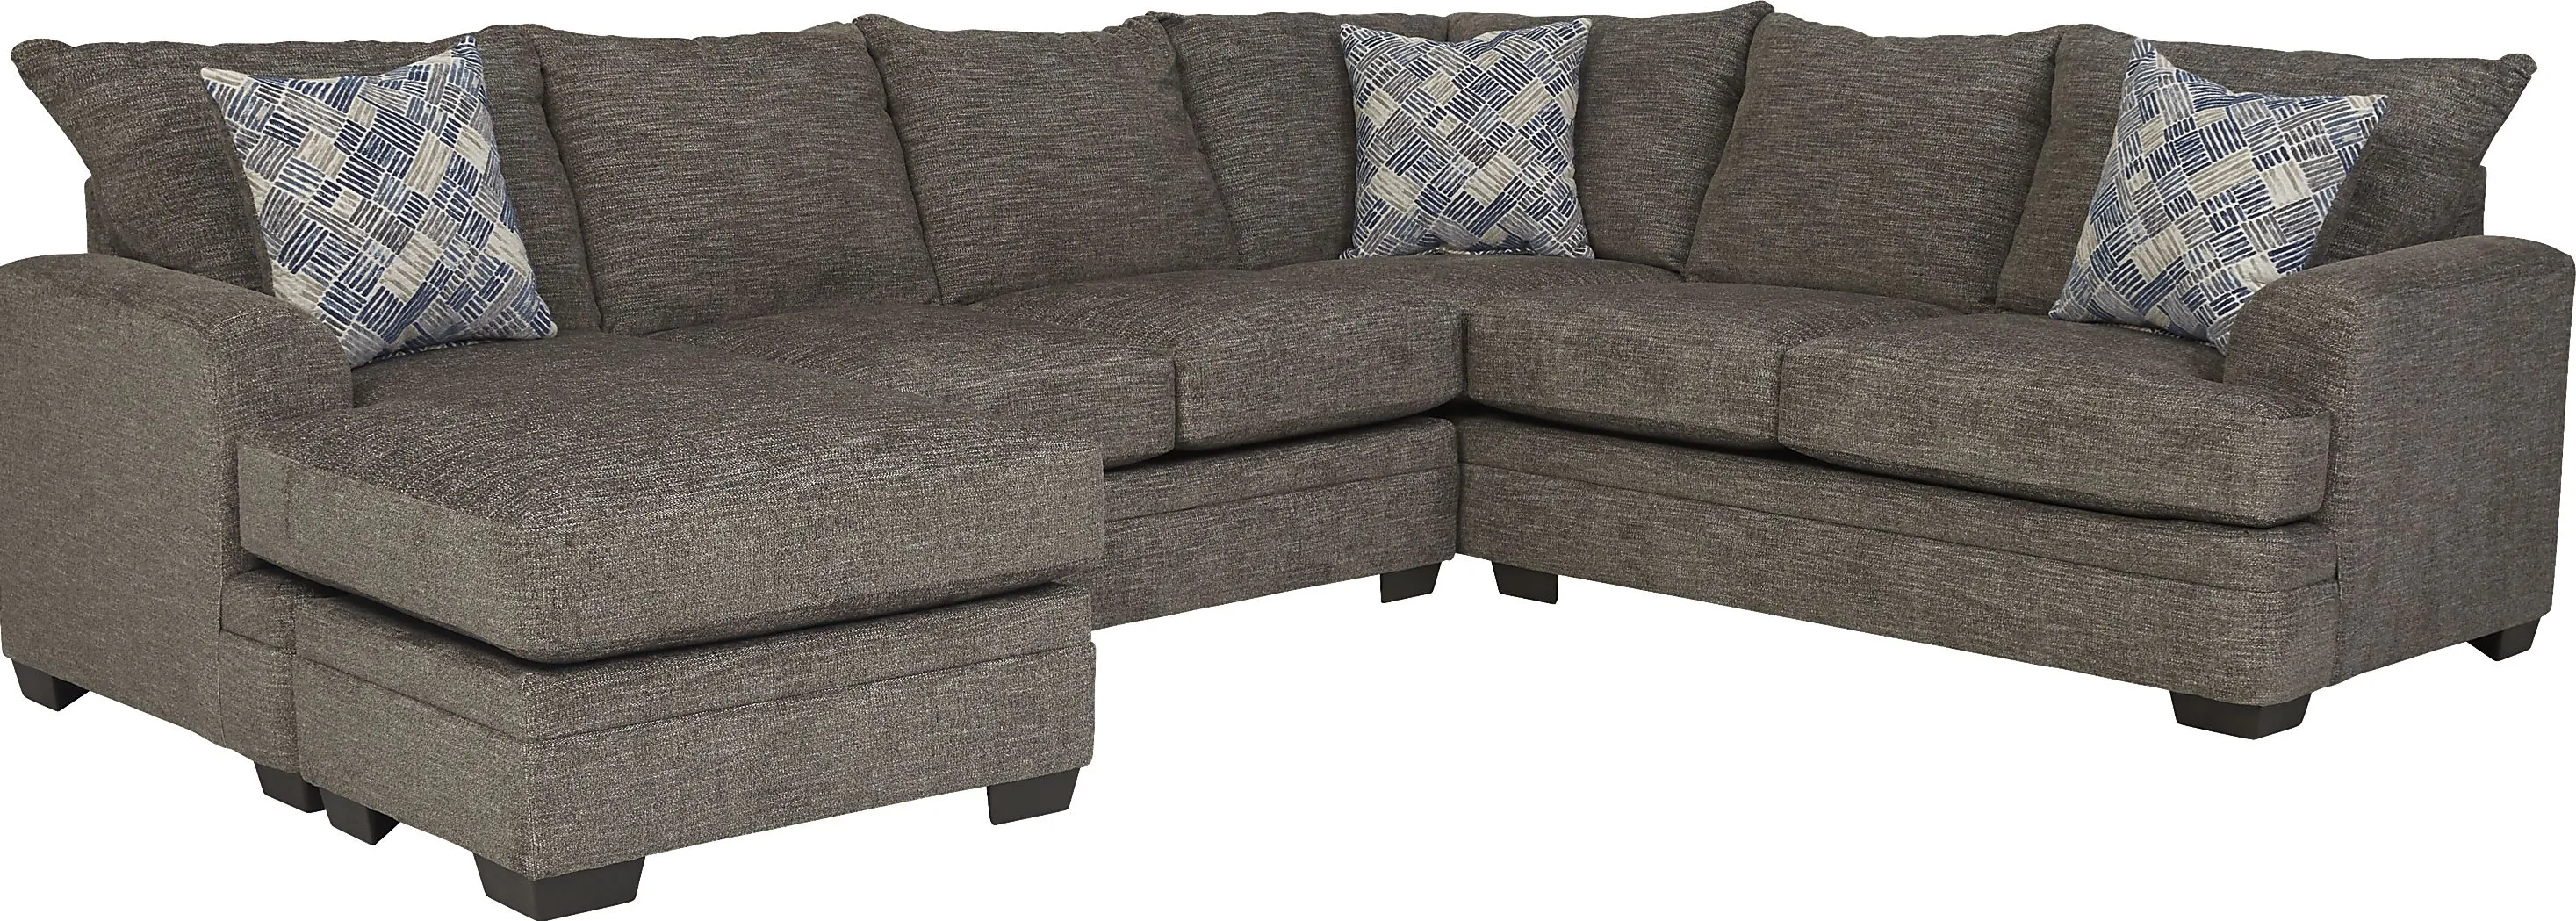 Copley Court Pewter 2 Pc Sleeper Sectional